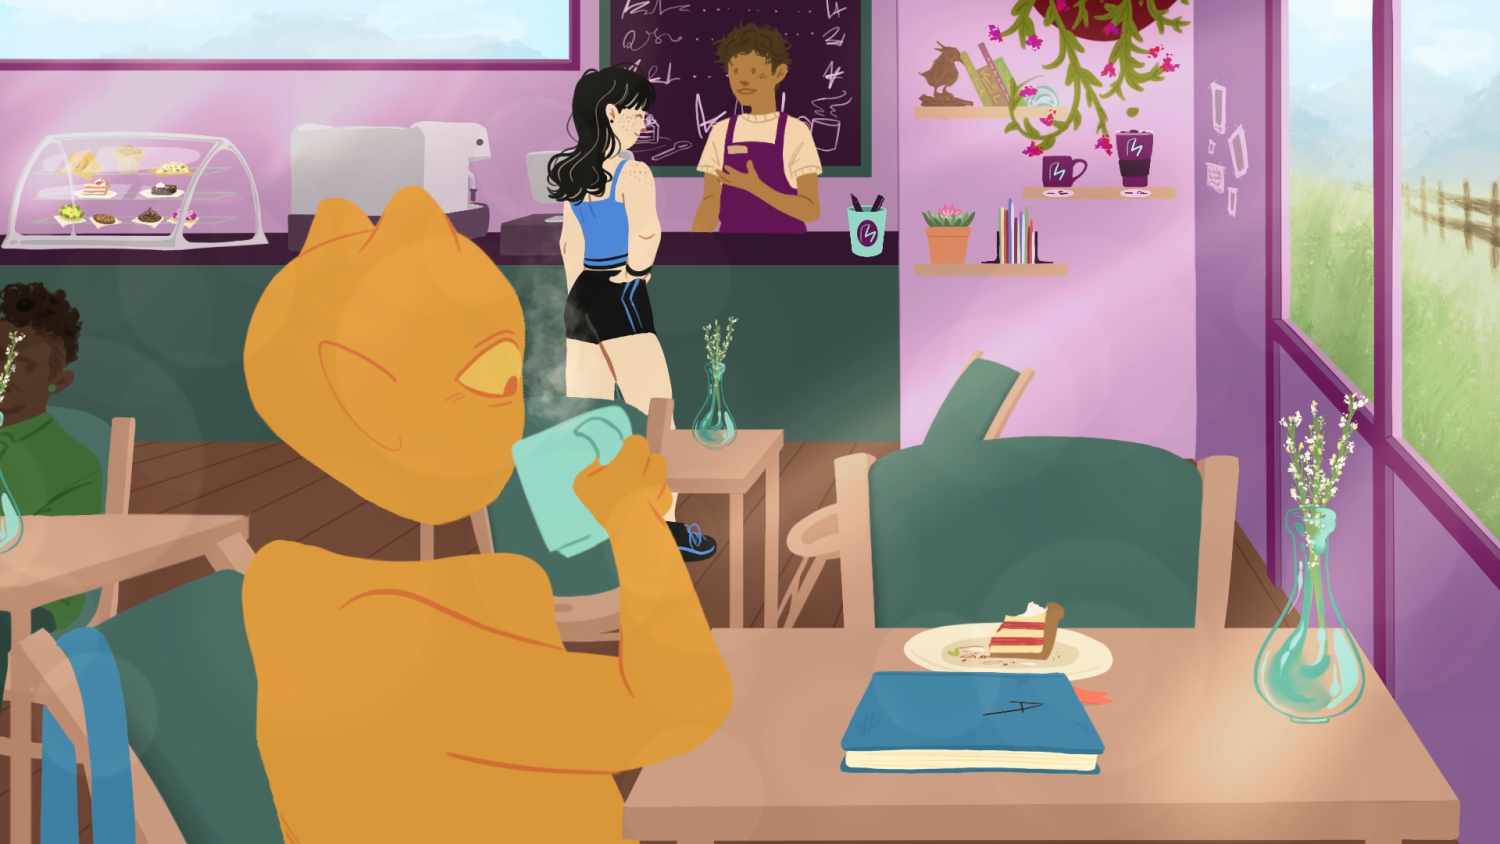 An alien sits in a coffee shop with a notebook in front of him, sipping coffee, while a barista and customer have a friendly chat in the background. The overall vide of the still image is bright, saturated with color, and calm.